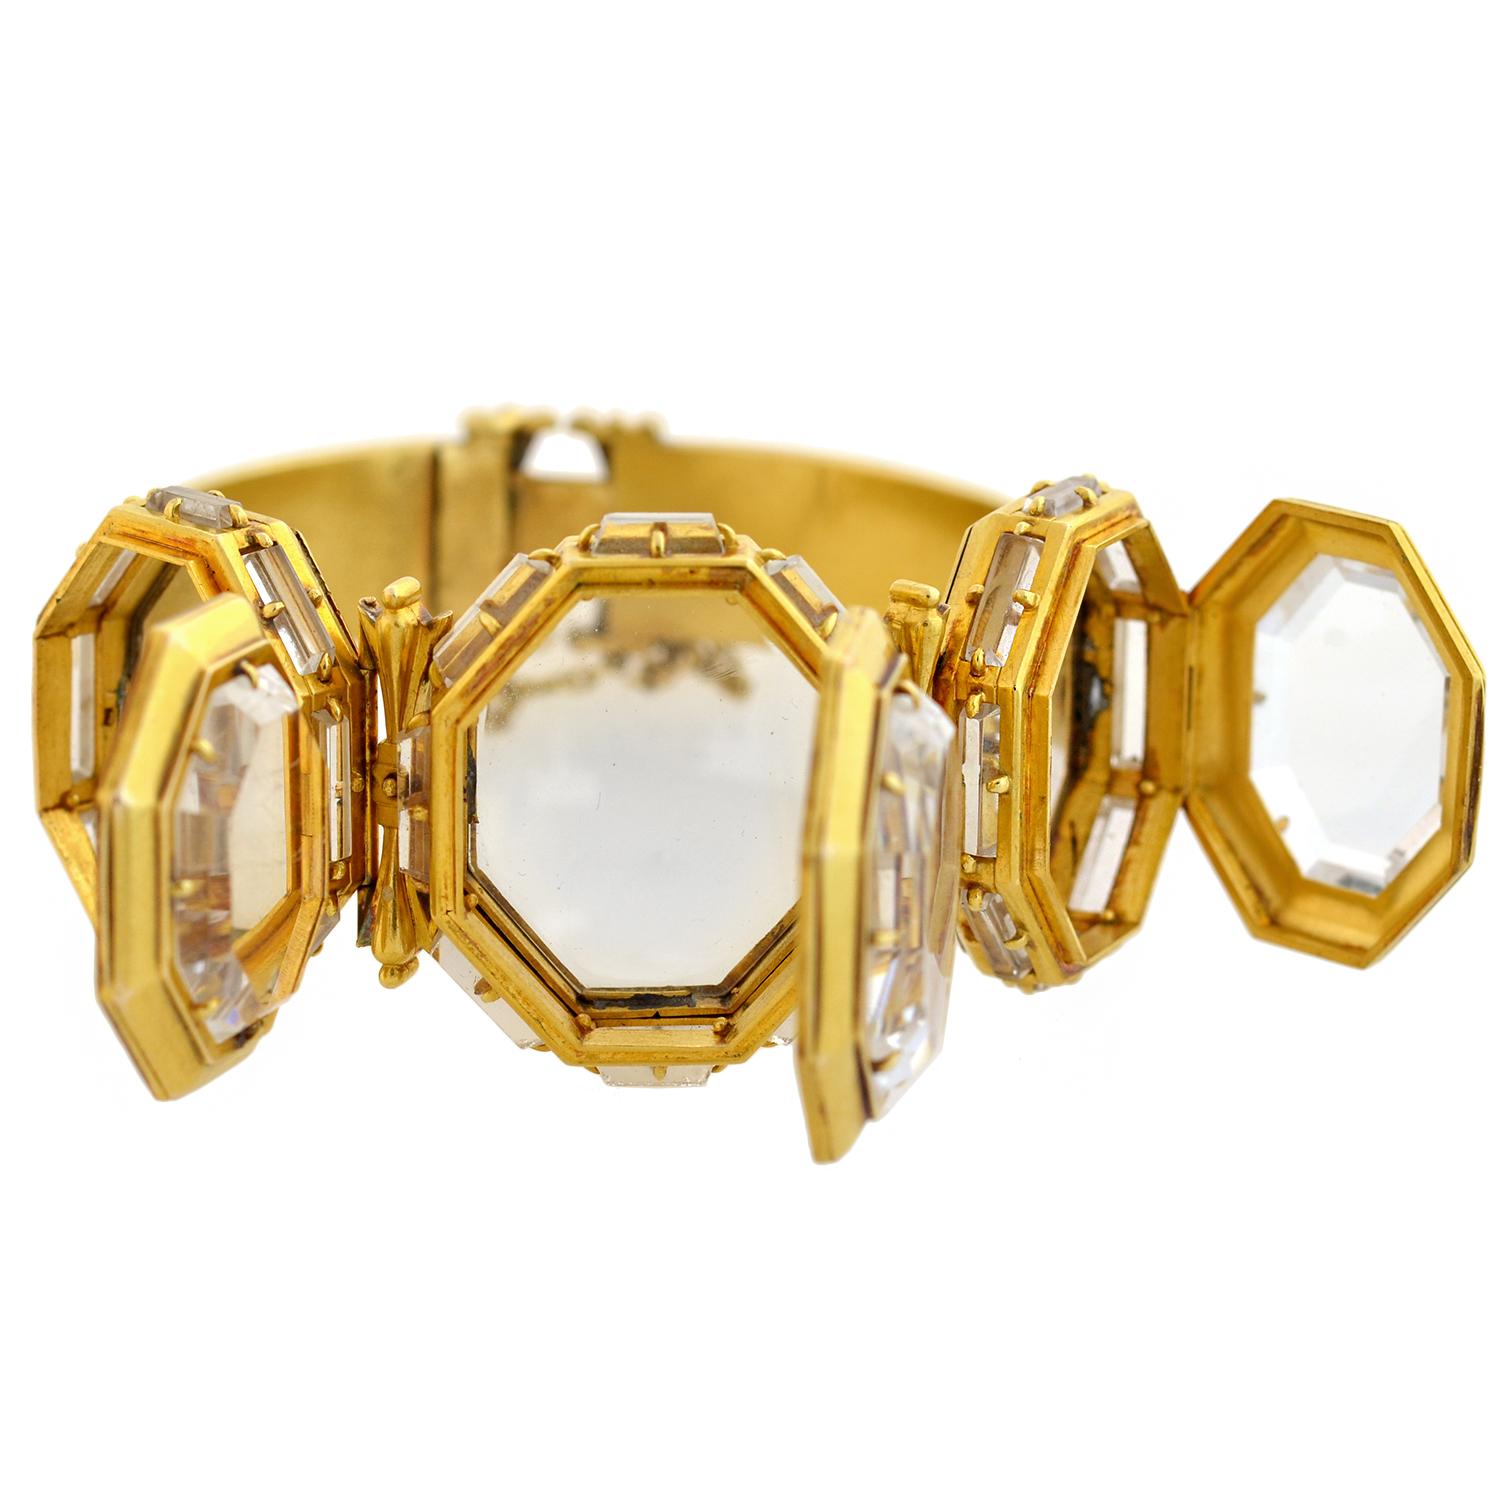 This outstanding locket bracelet from the Early Victorian era (ca1850) is an incredibly rare and unusual find! Crafted in vibrant 15kt gold, it has a trio of lockets that line the front, each boasting an attractive geometric shape. The face and back